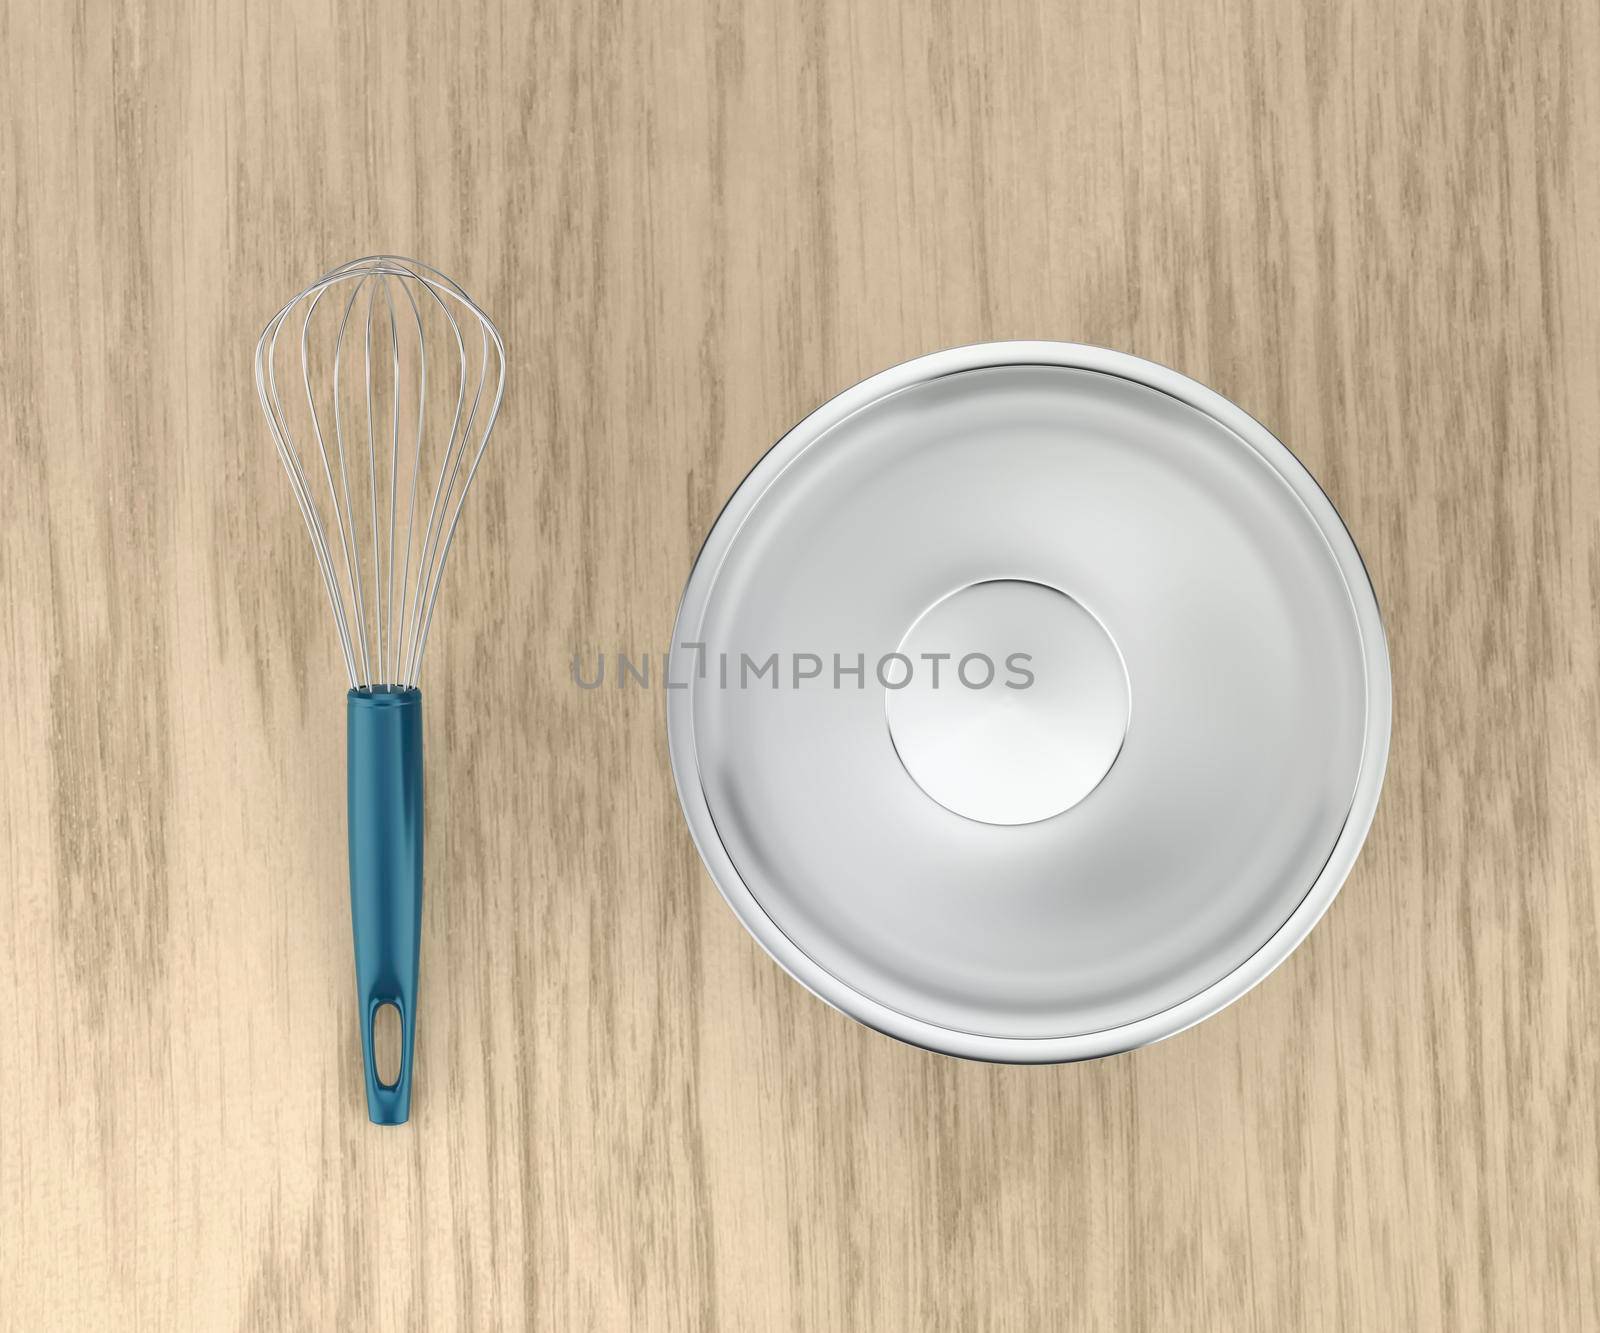 Balloon whisk and metal bowl by magraphics